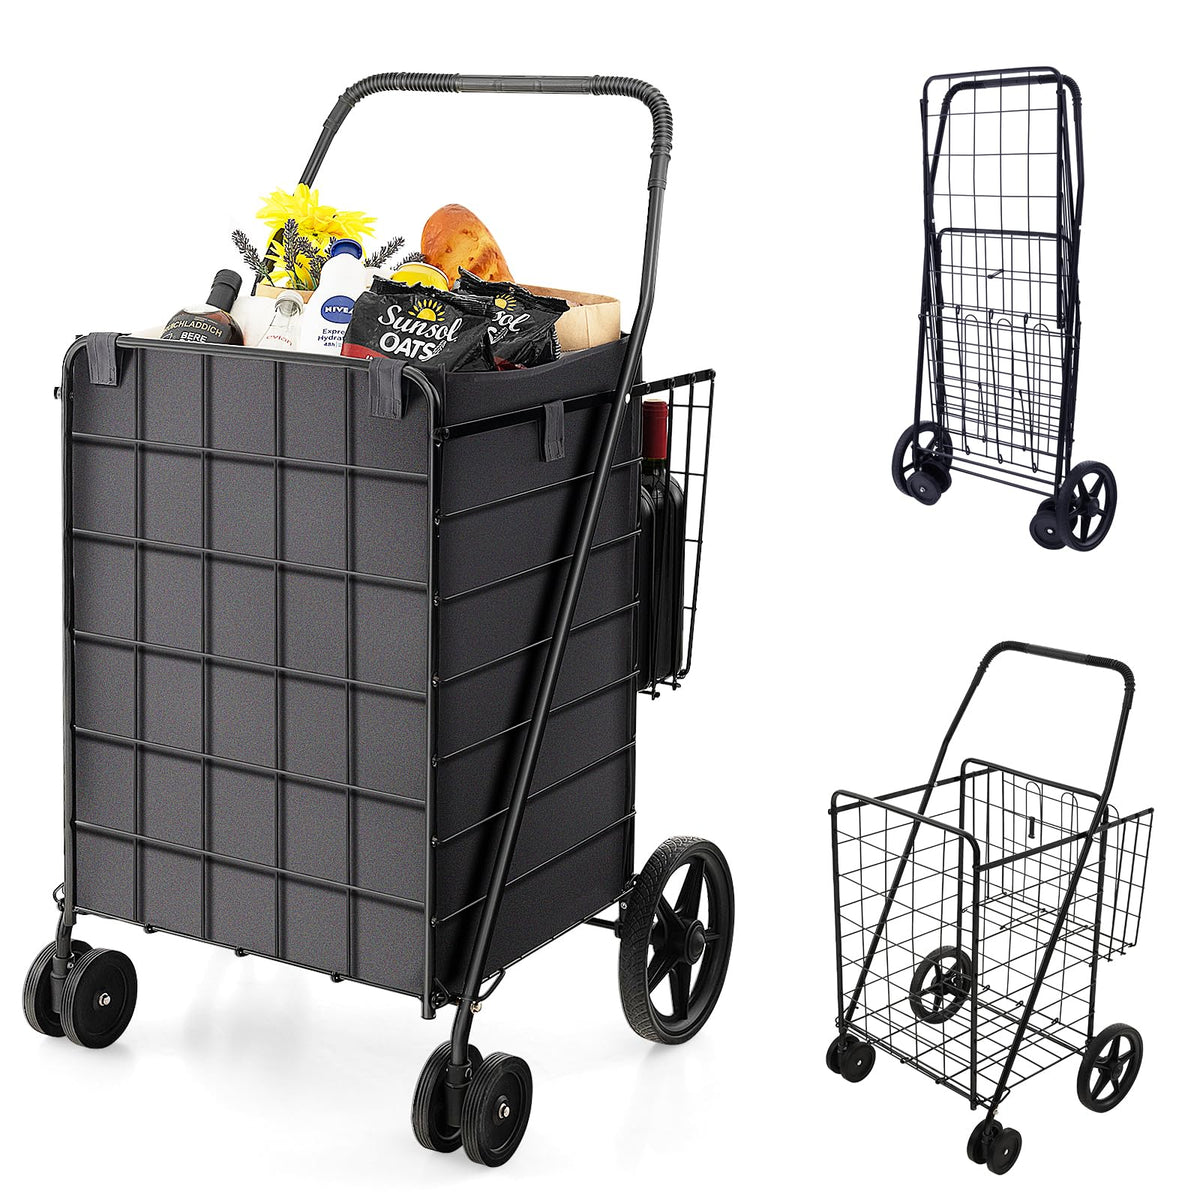 Goplus Folding Shopping Cart for Groceries, 330 LBS Weight Capacity, 360° Rolling Swivel Wheels and Double Basket